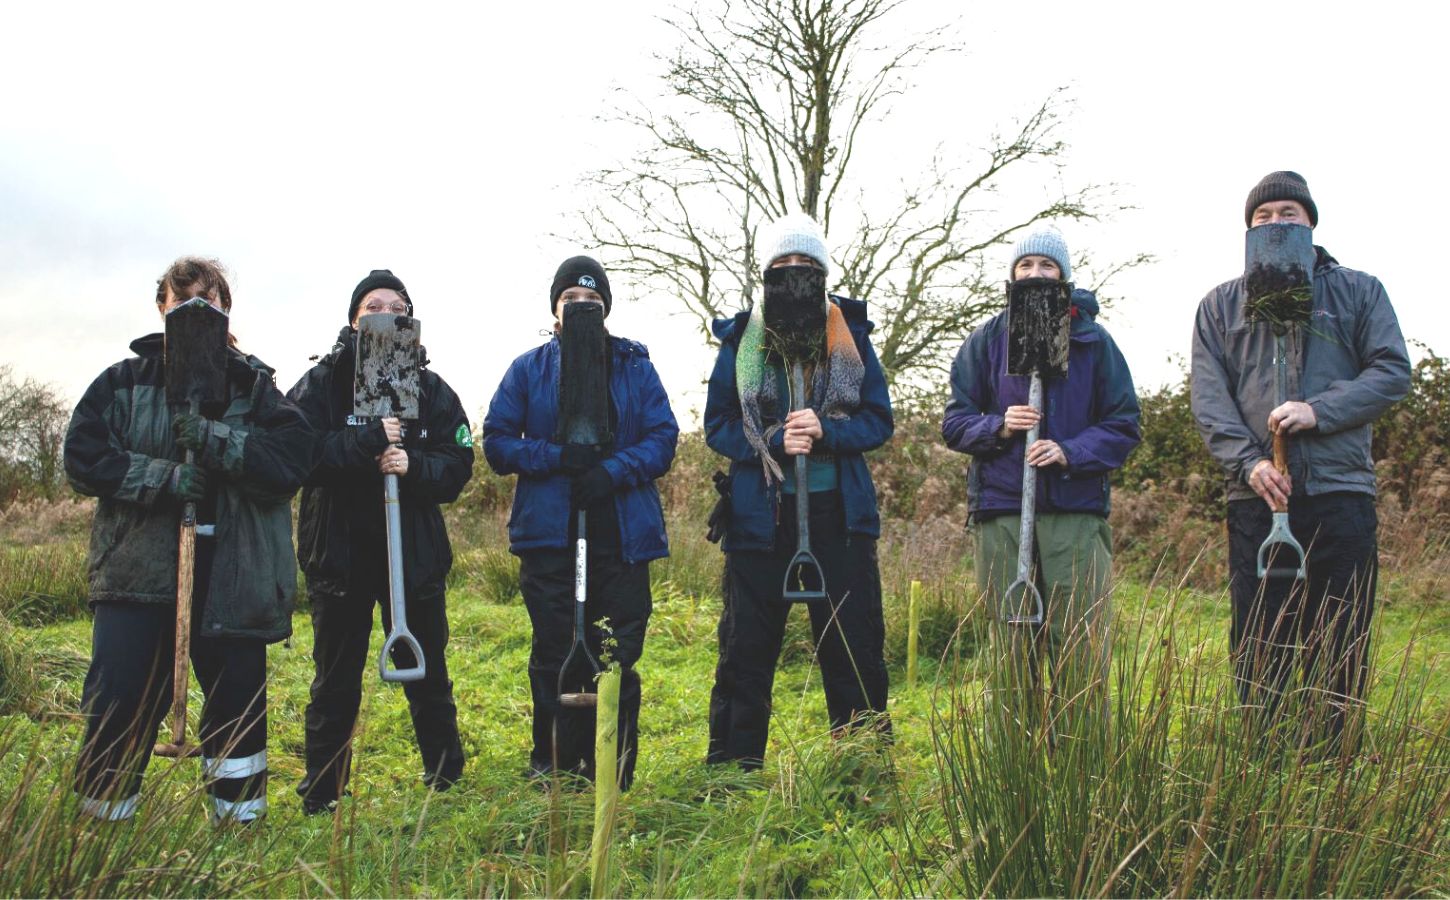 Members of the Vegan Land Movement standing in a field holding spades that cover their faces